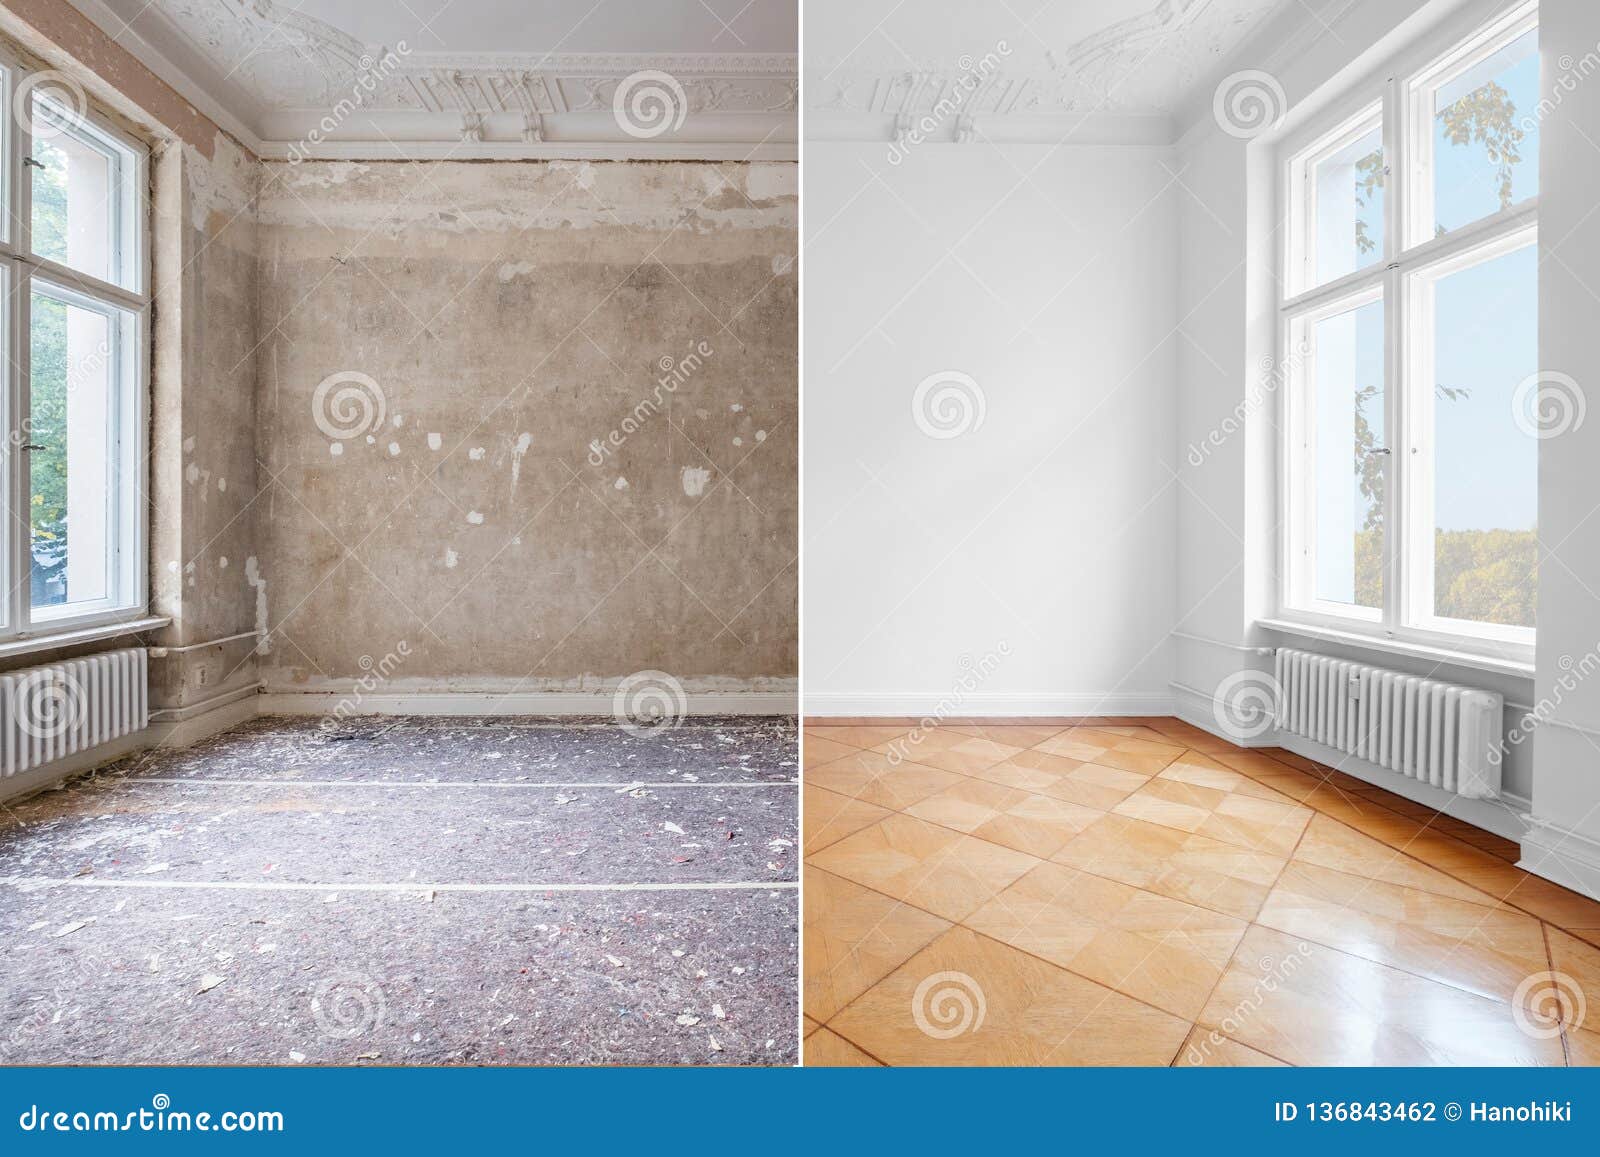 Flat Renovation Empty Room Before And After Refurbishment Old And New Interior Stock Photo Image Of Architecture Improvement 136843462,American Airlines Wifi Voucher Code